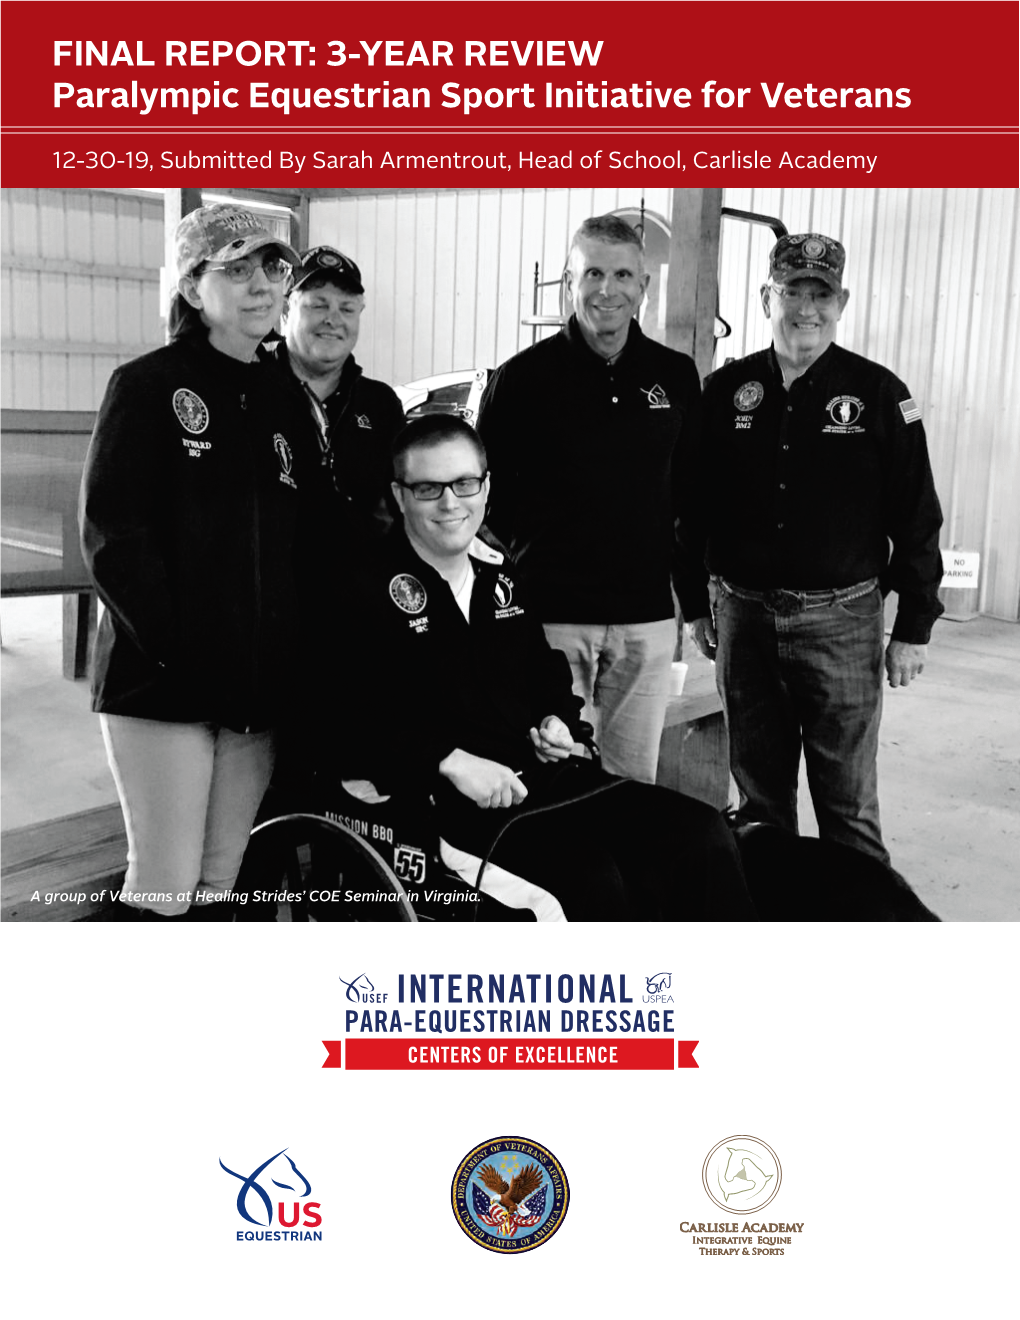 Read Our Final Report on the Paralympic Equestrian Sport Initiative for Veterans